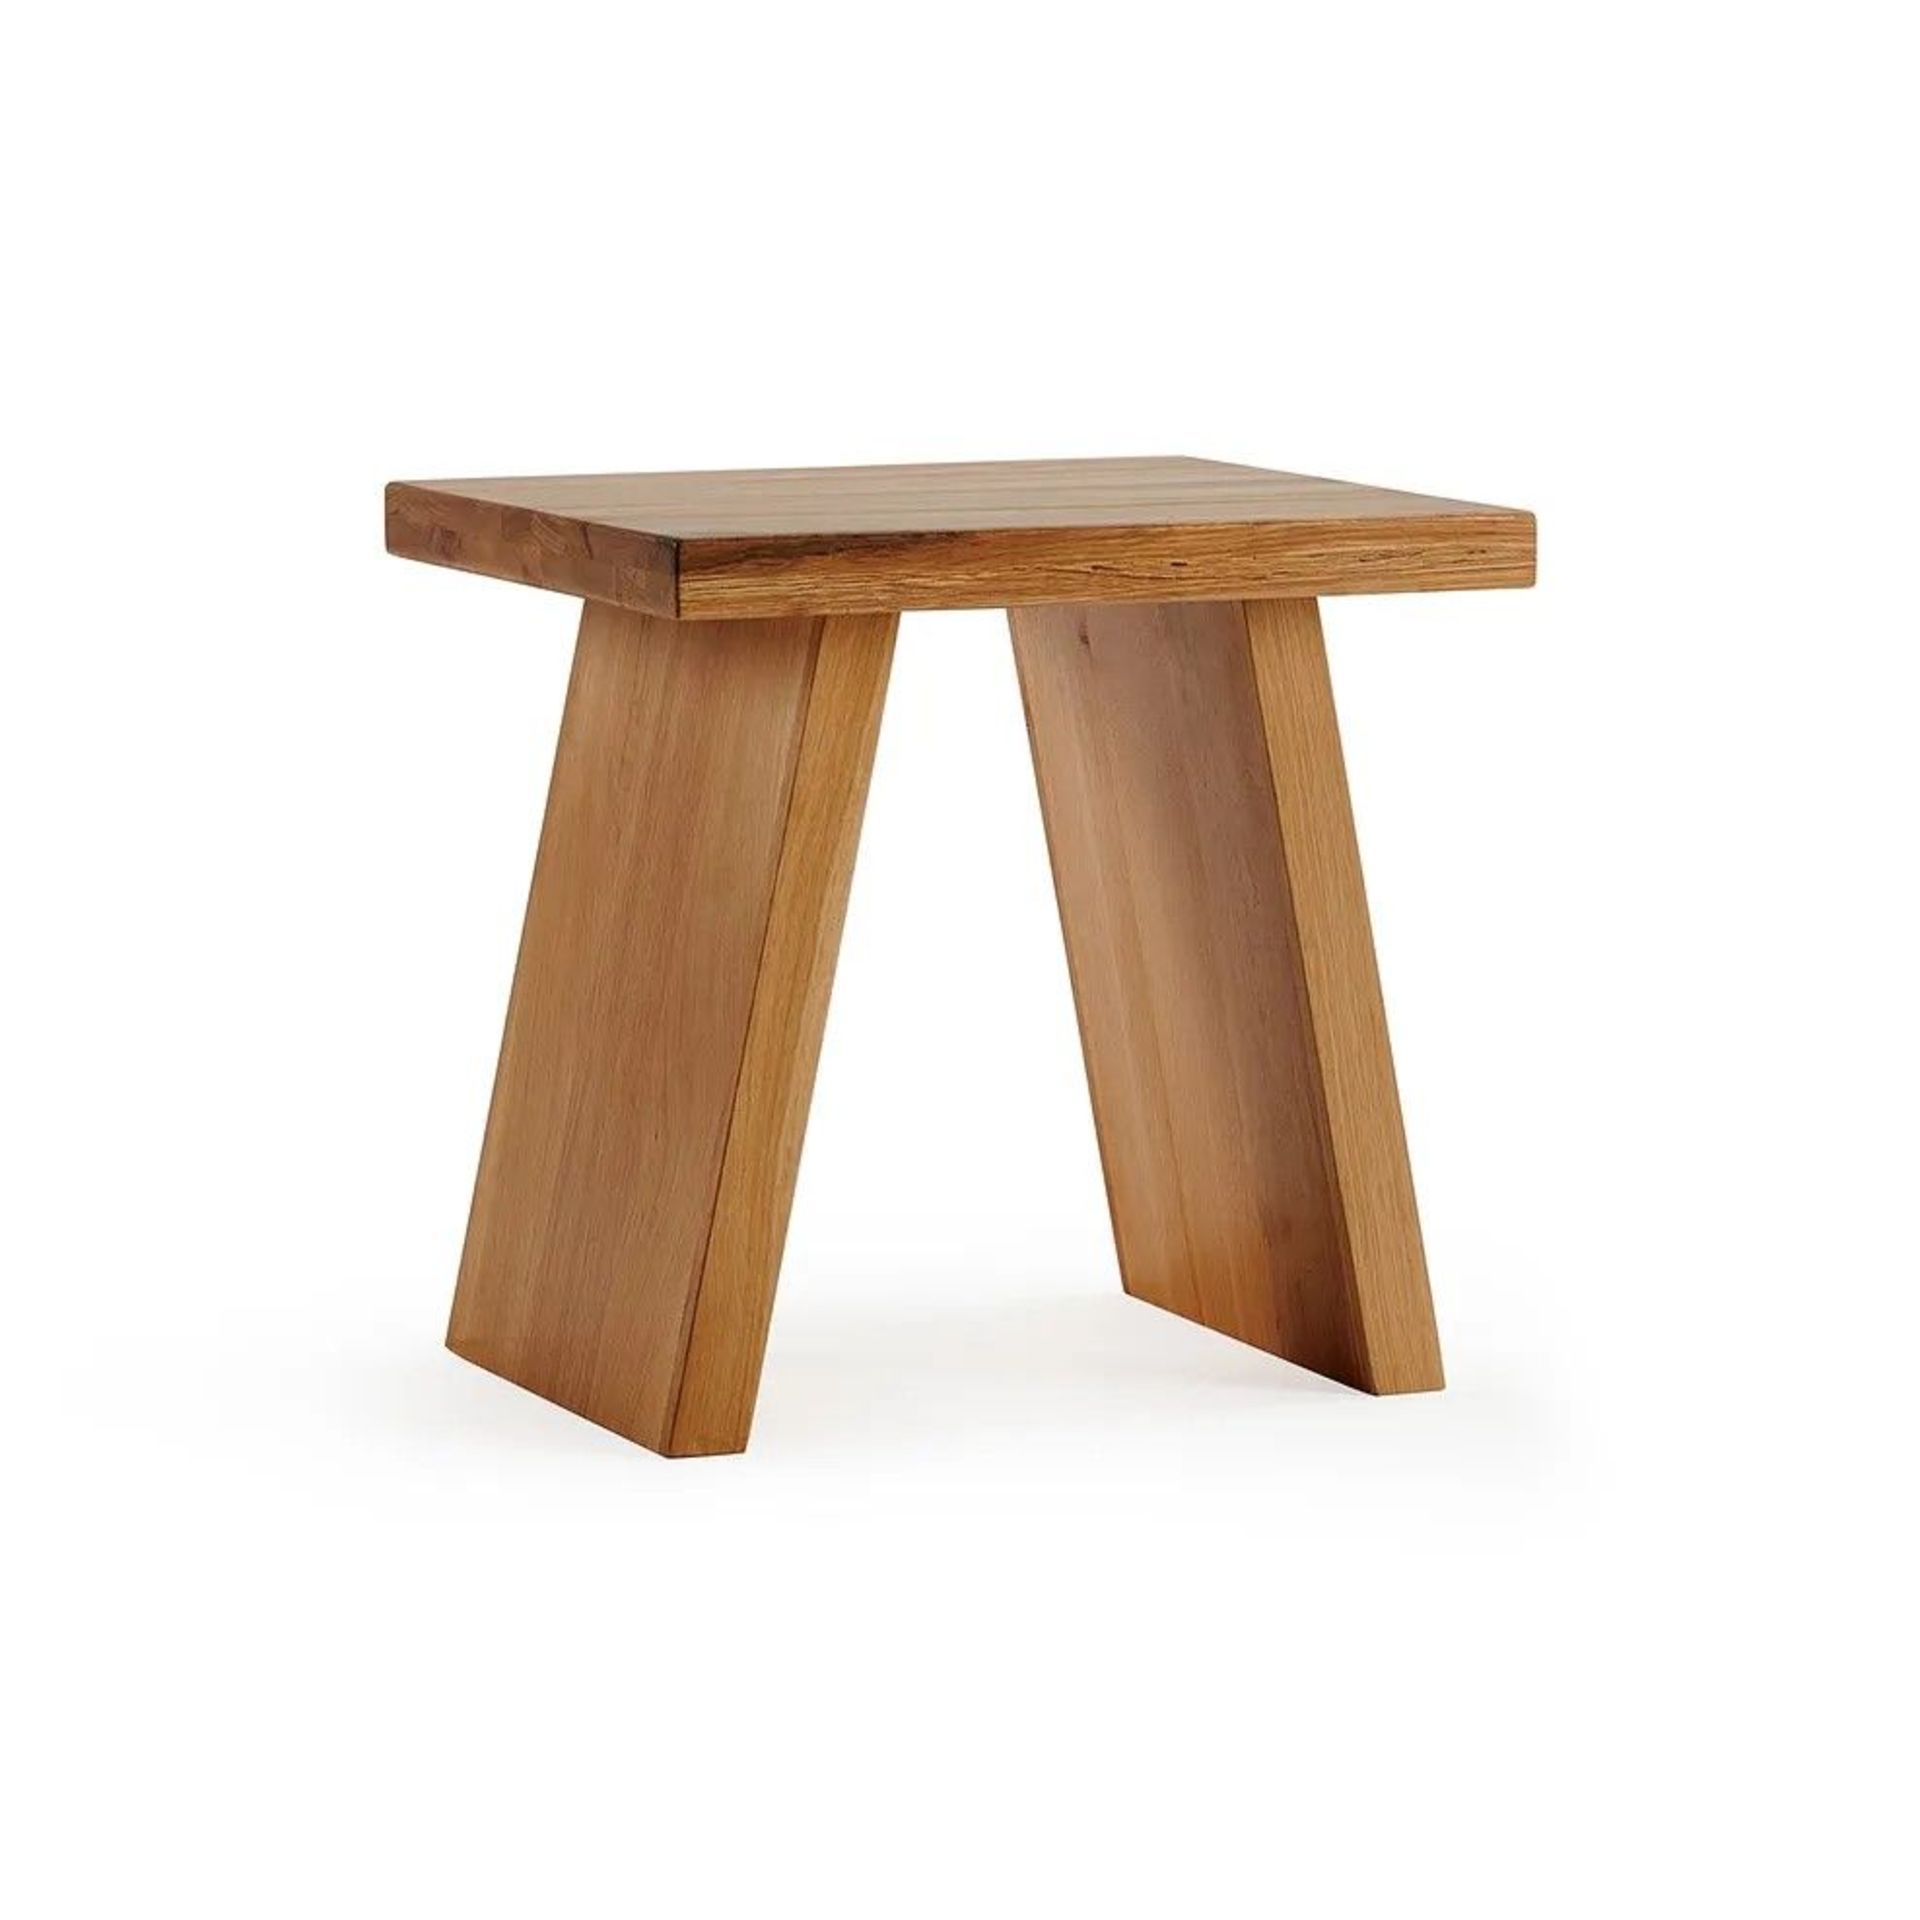 10 X NEW BOXED Natural Solid Oak Stool. RRP £130 EACH, TOTAL RRP £1,300. For a more open seating